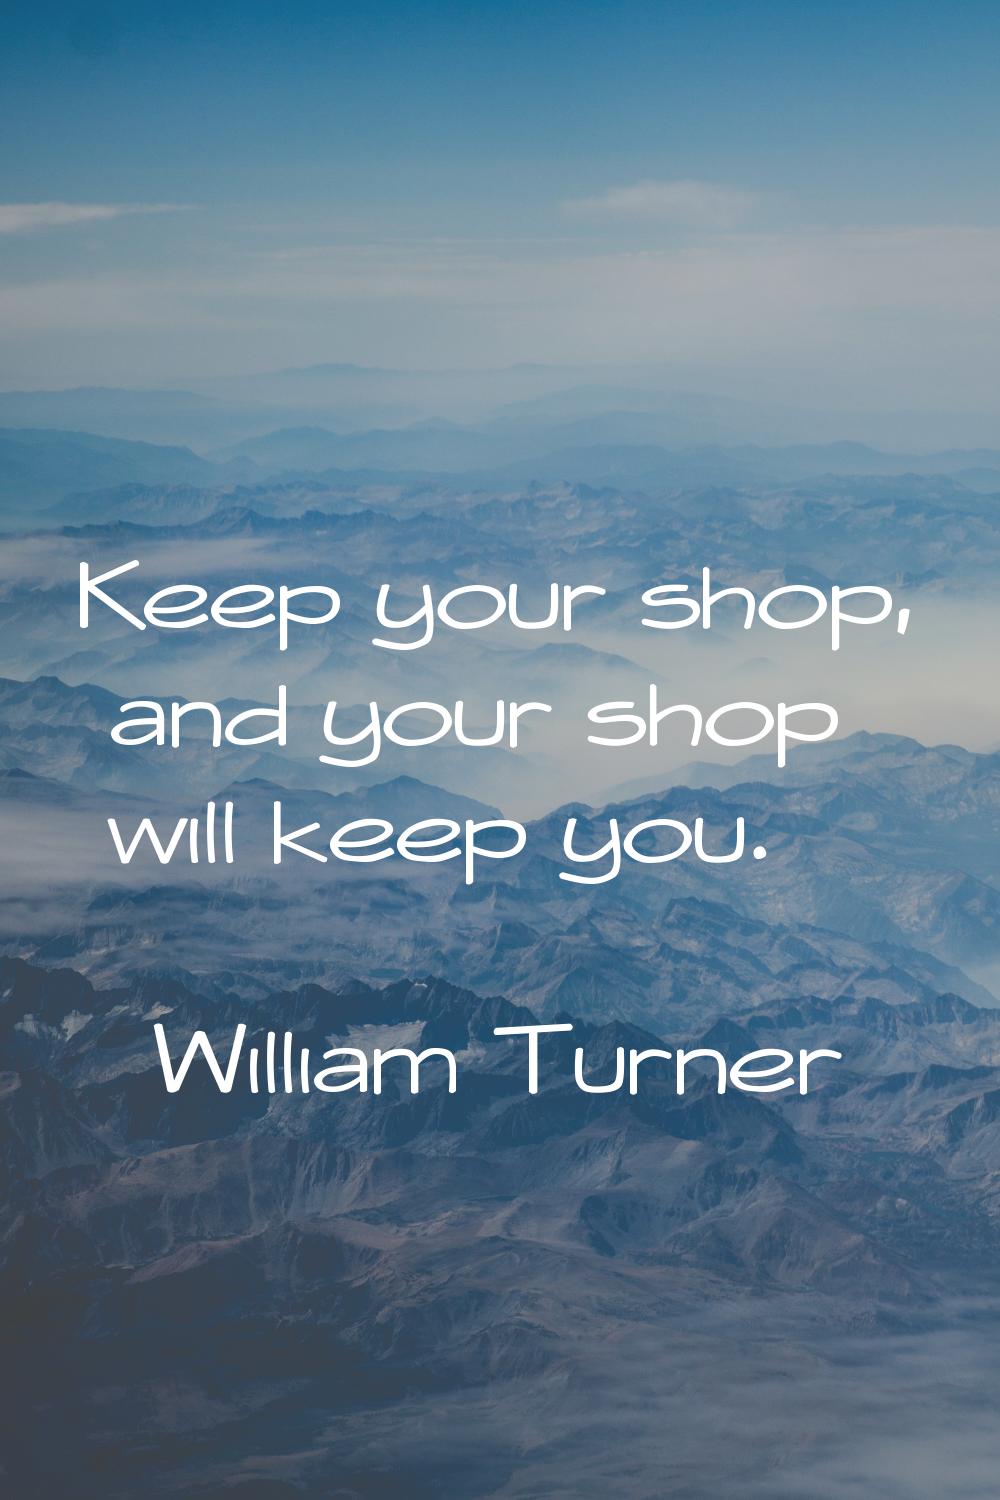 Keep your shop, and your shop will keep you.